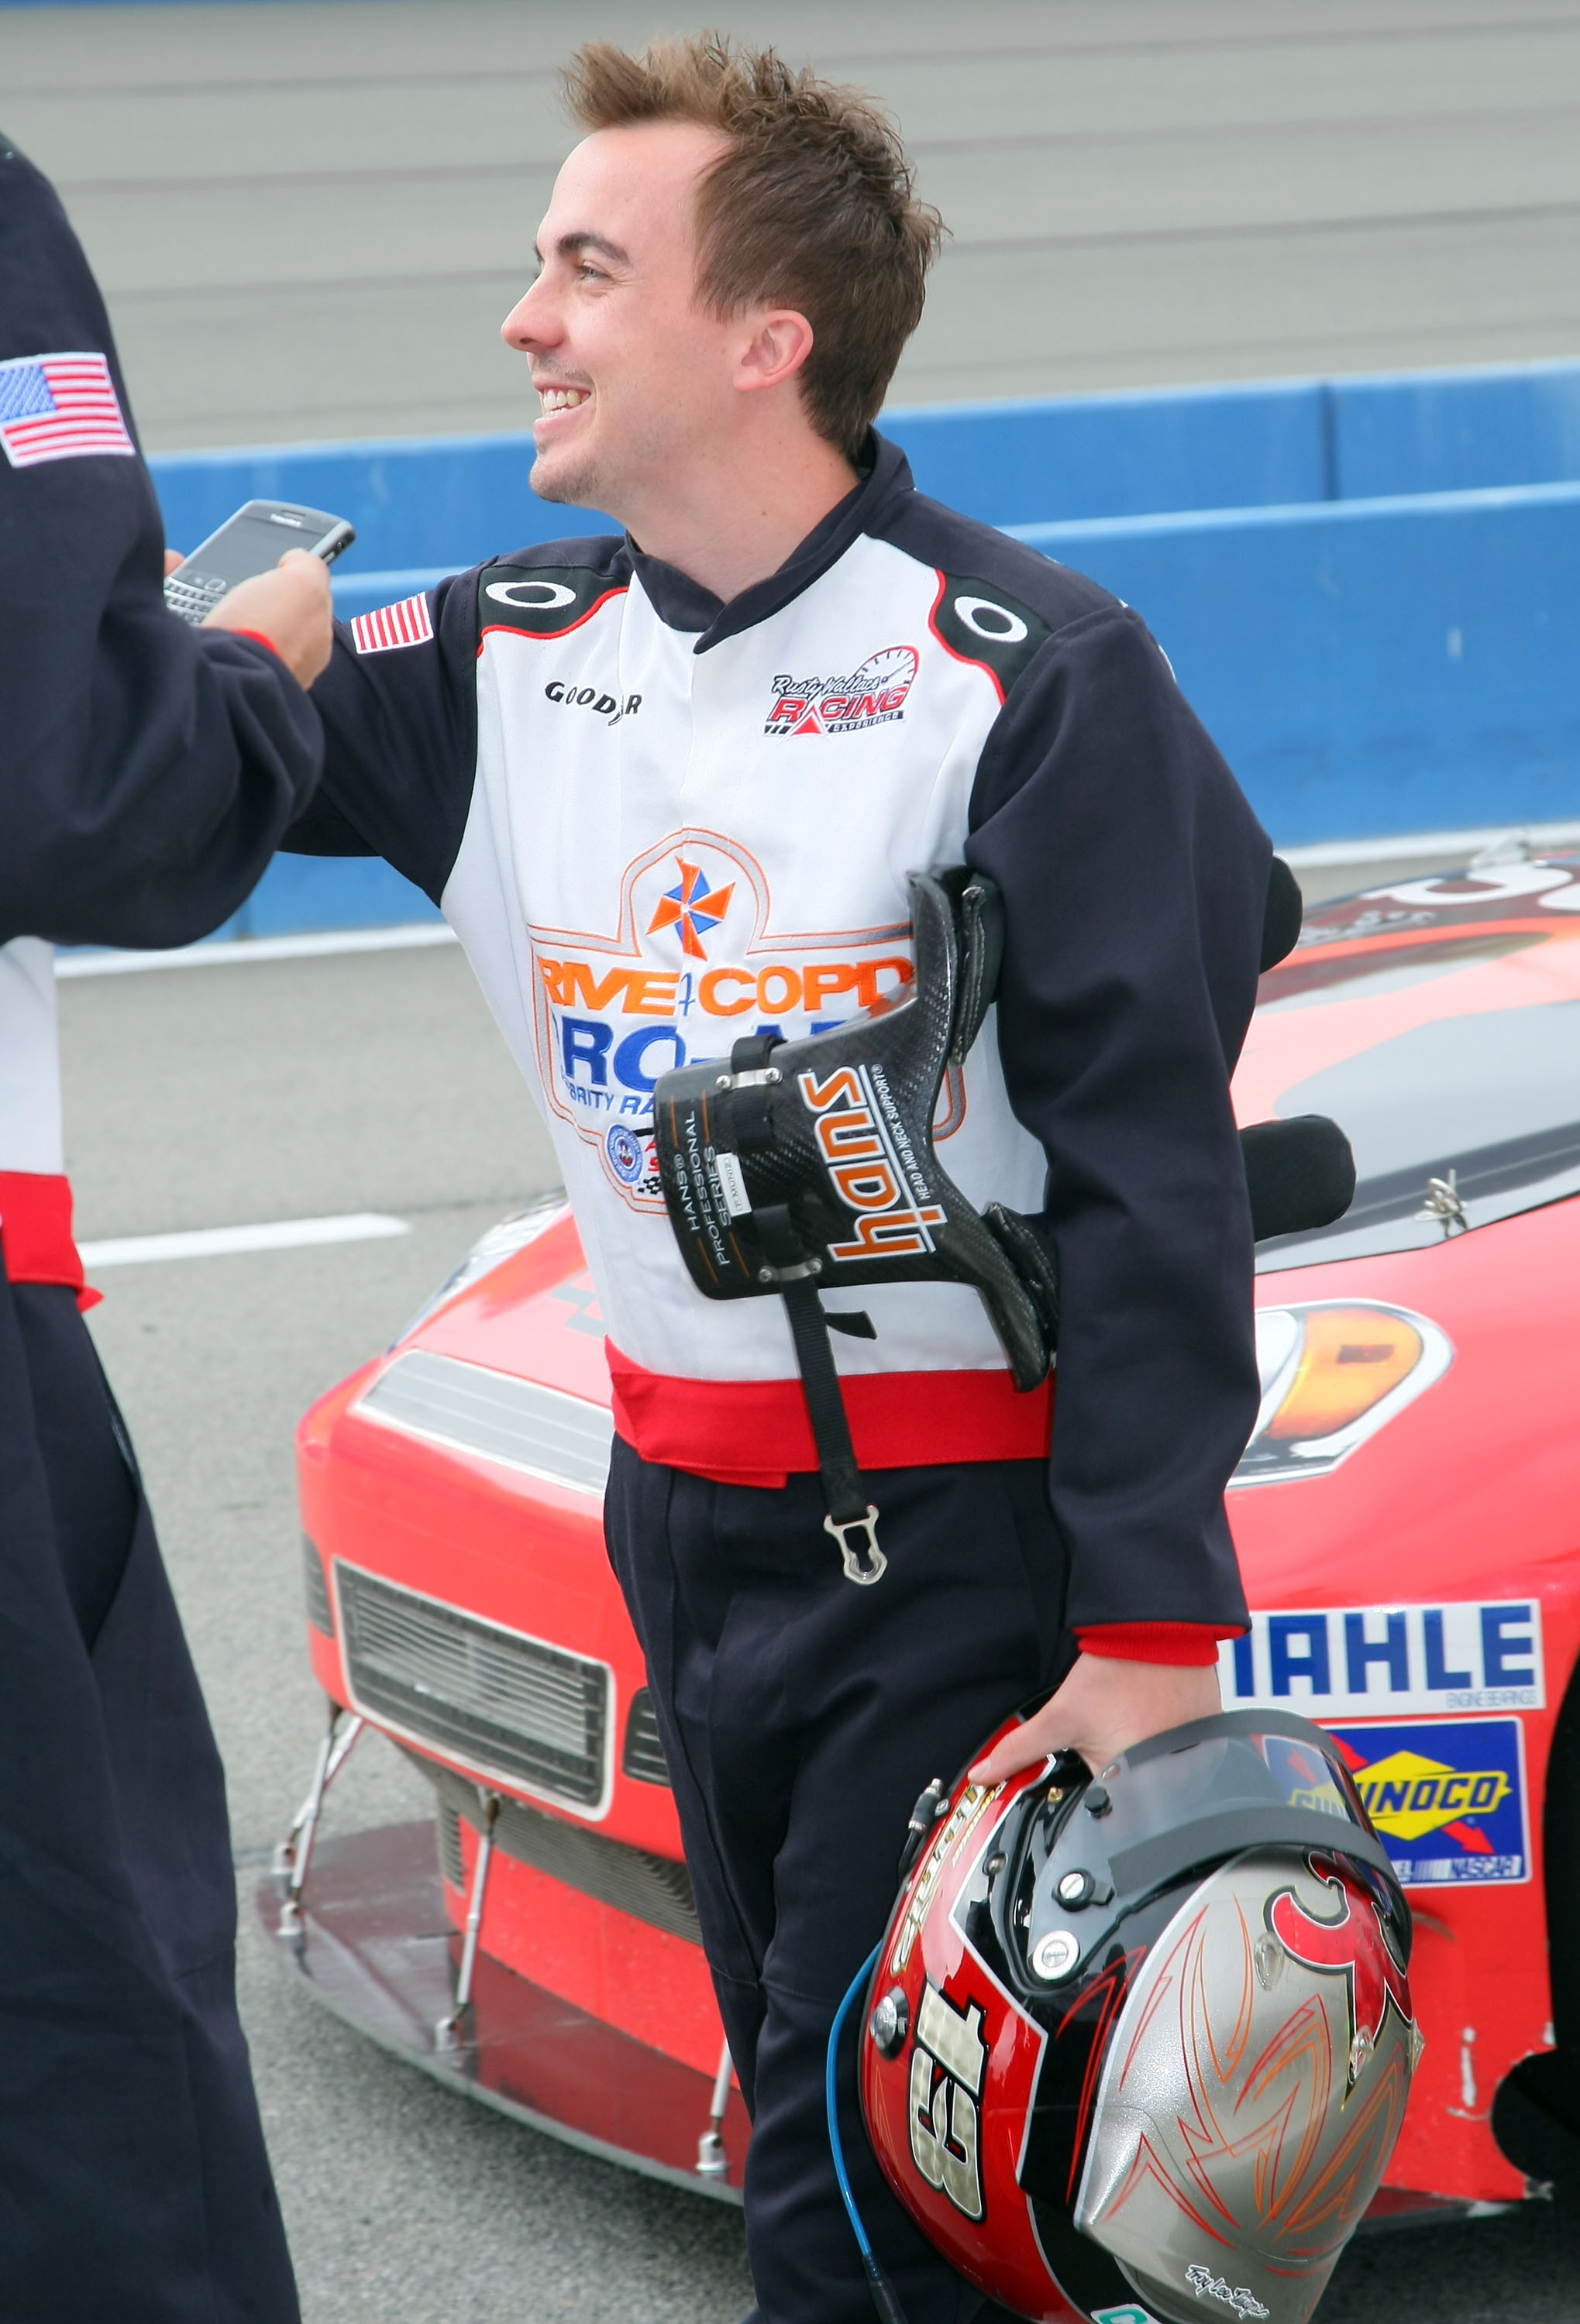 Frankie Muniz at the DRIVE4COPD Pro-Am Celebrity Racing on March 23, 2012 in Fontana, California | Source: Getty Images